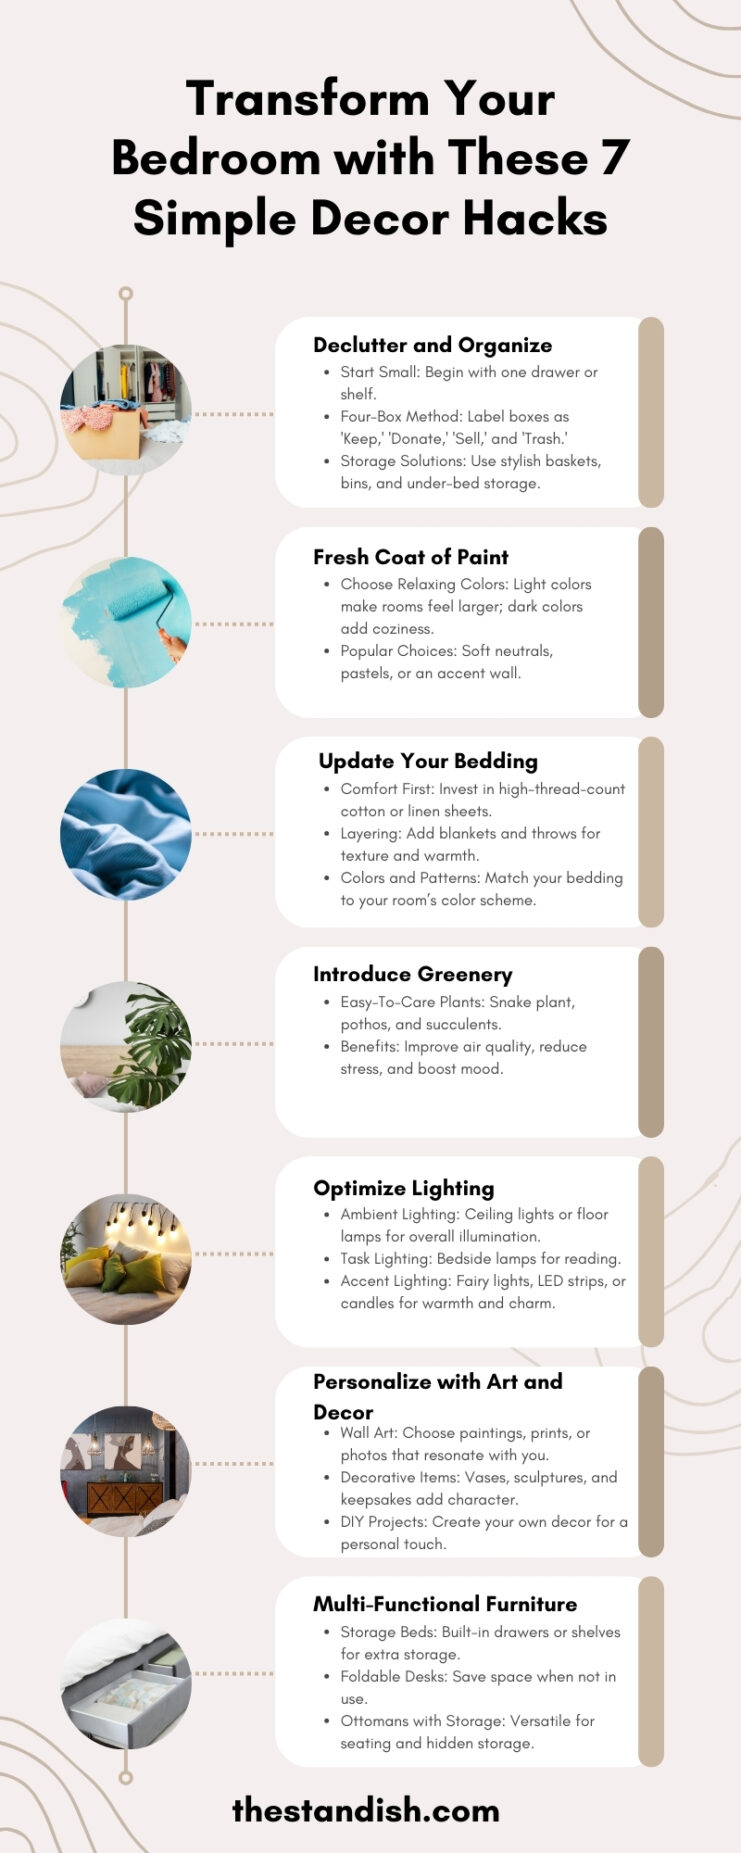 Transform Your Bedroom with 7 Simple Decor Hacks Infographic